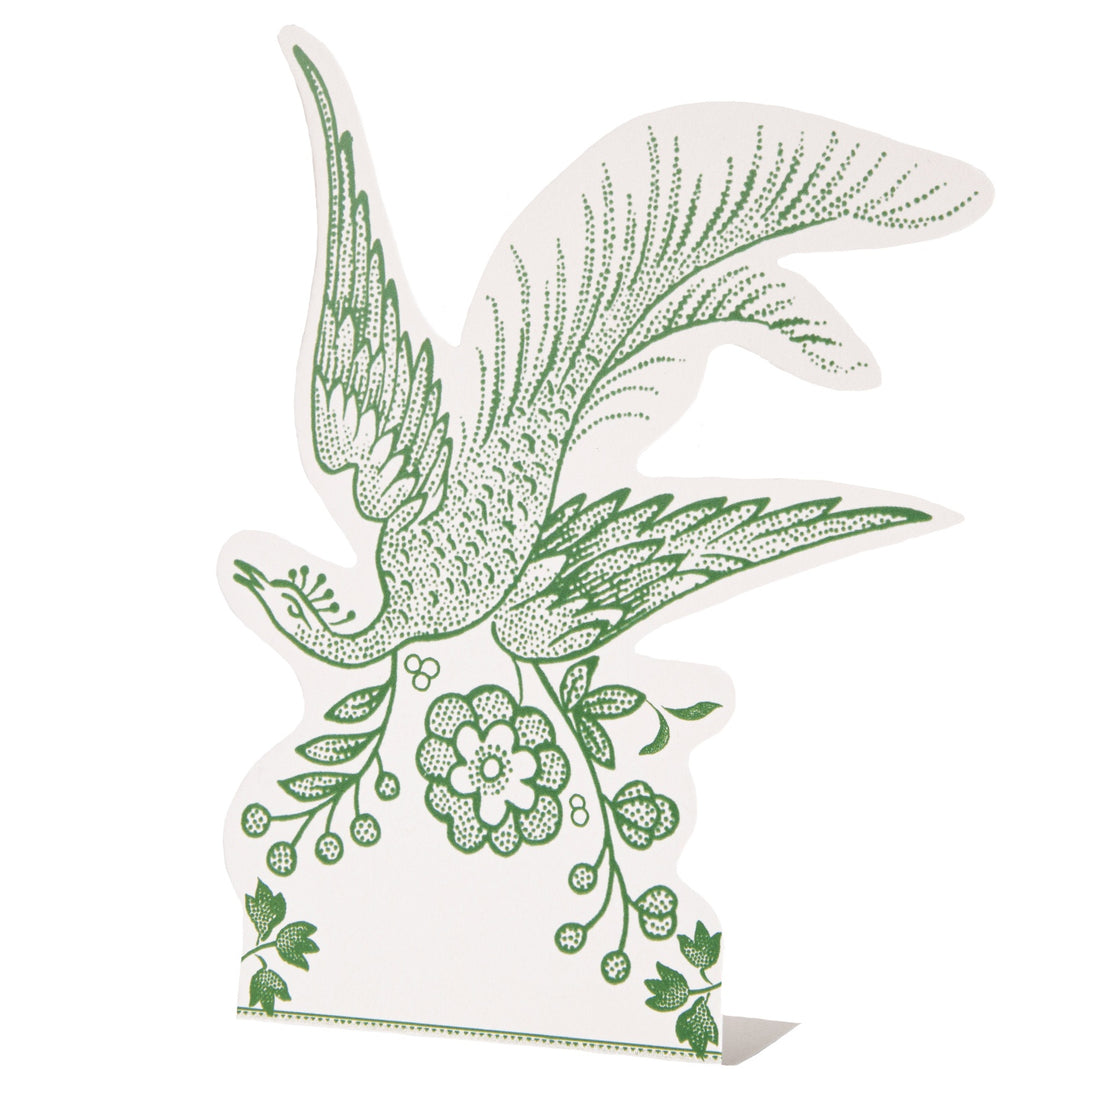 A die-cut, white paper place card that stands upright, featuring a green bird and floral design with an open space at the bottom, inspired by the ornamental bird pattern from Burleigh.